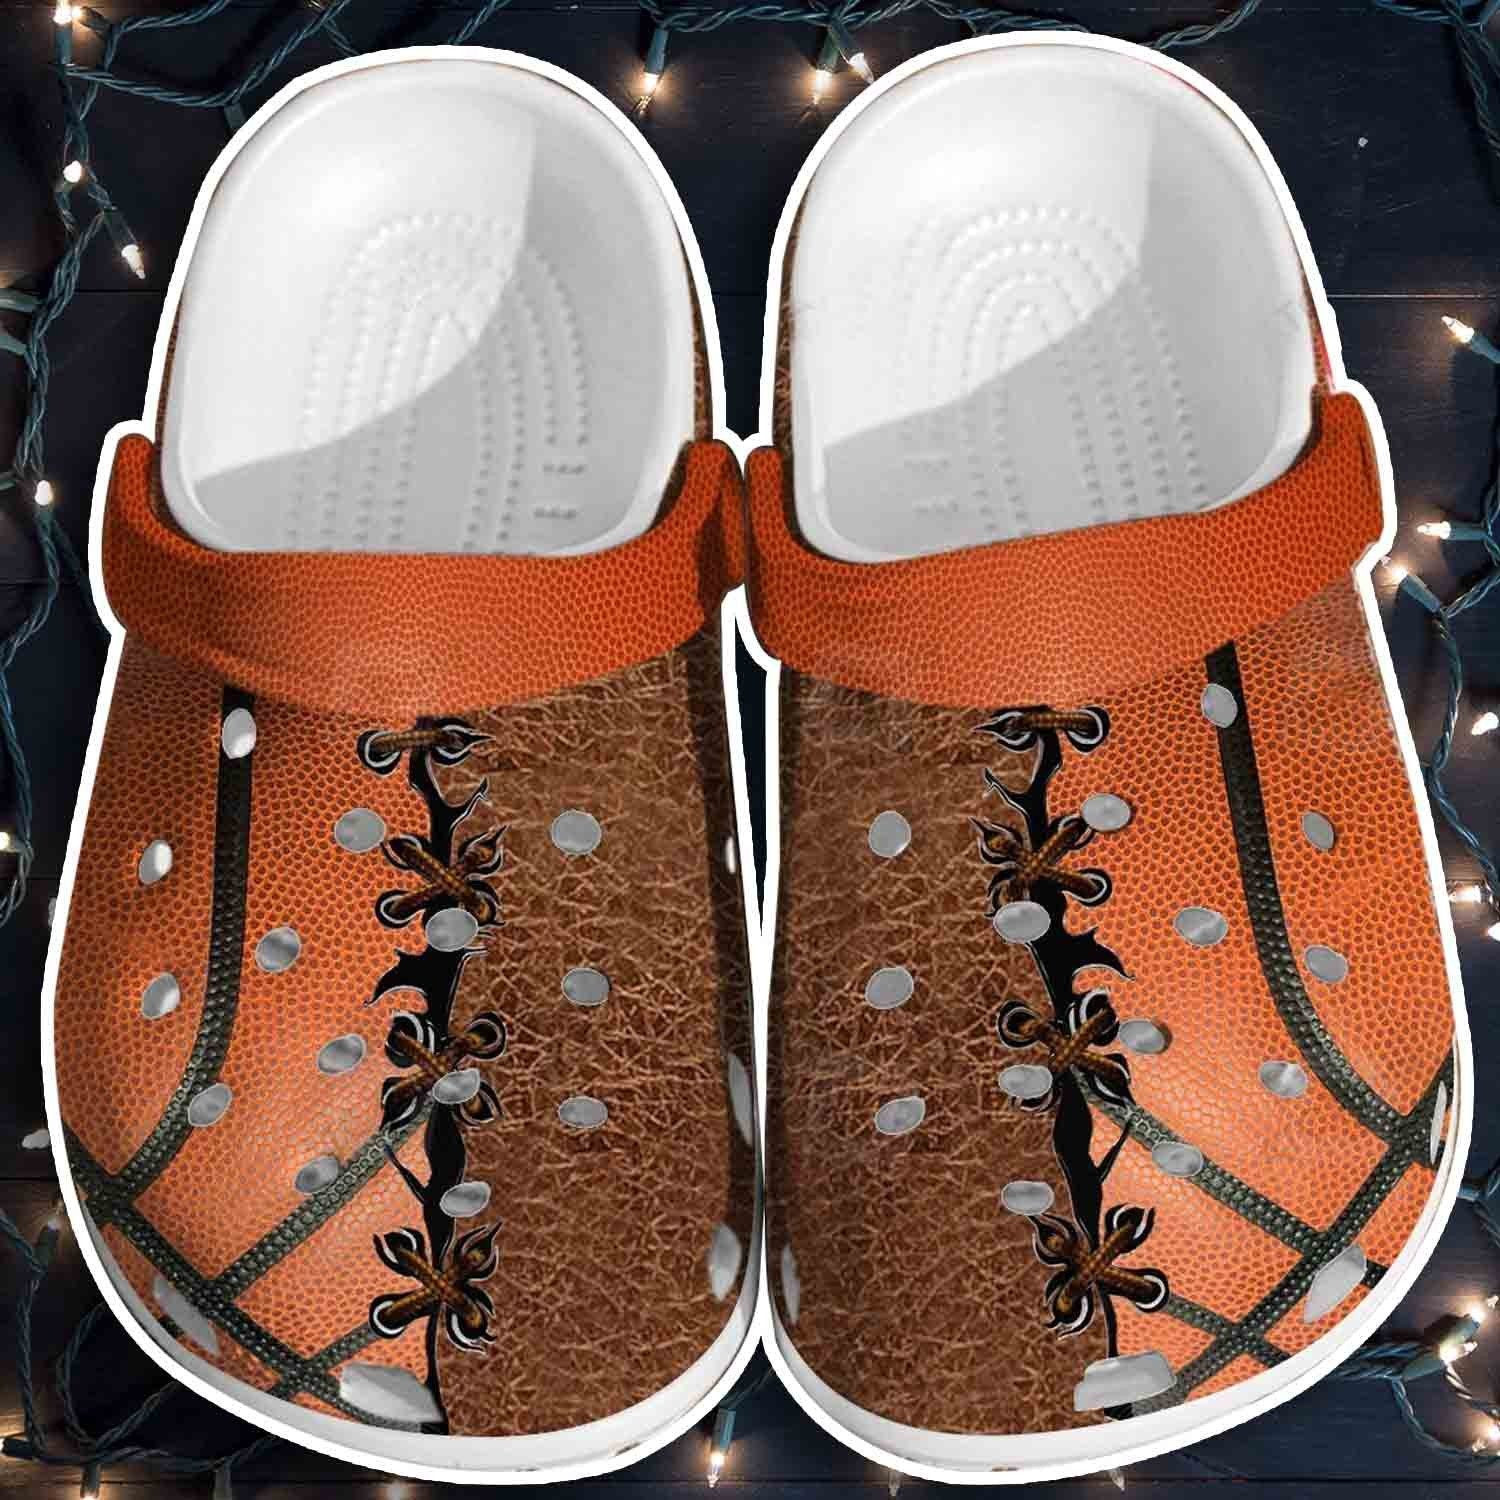 Basketball Leather Skin Croc Crocs Shoes Clog Gifts For Son Daughter